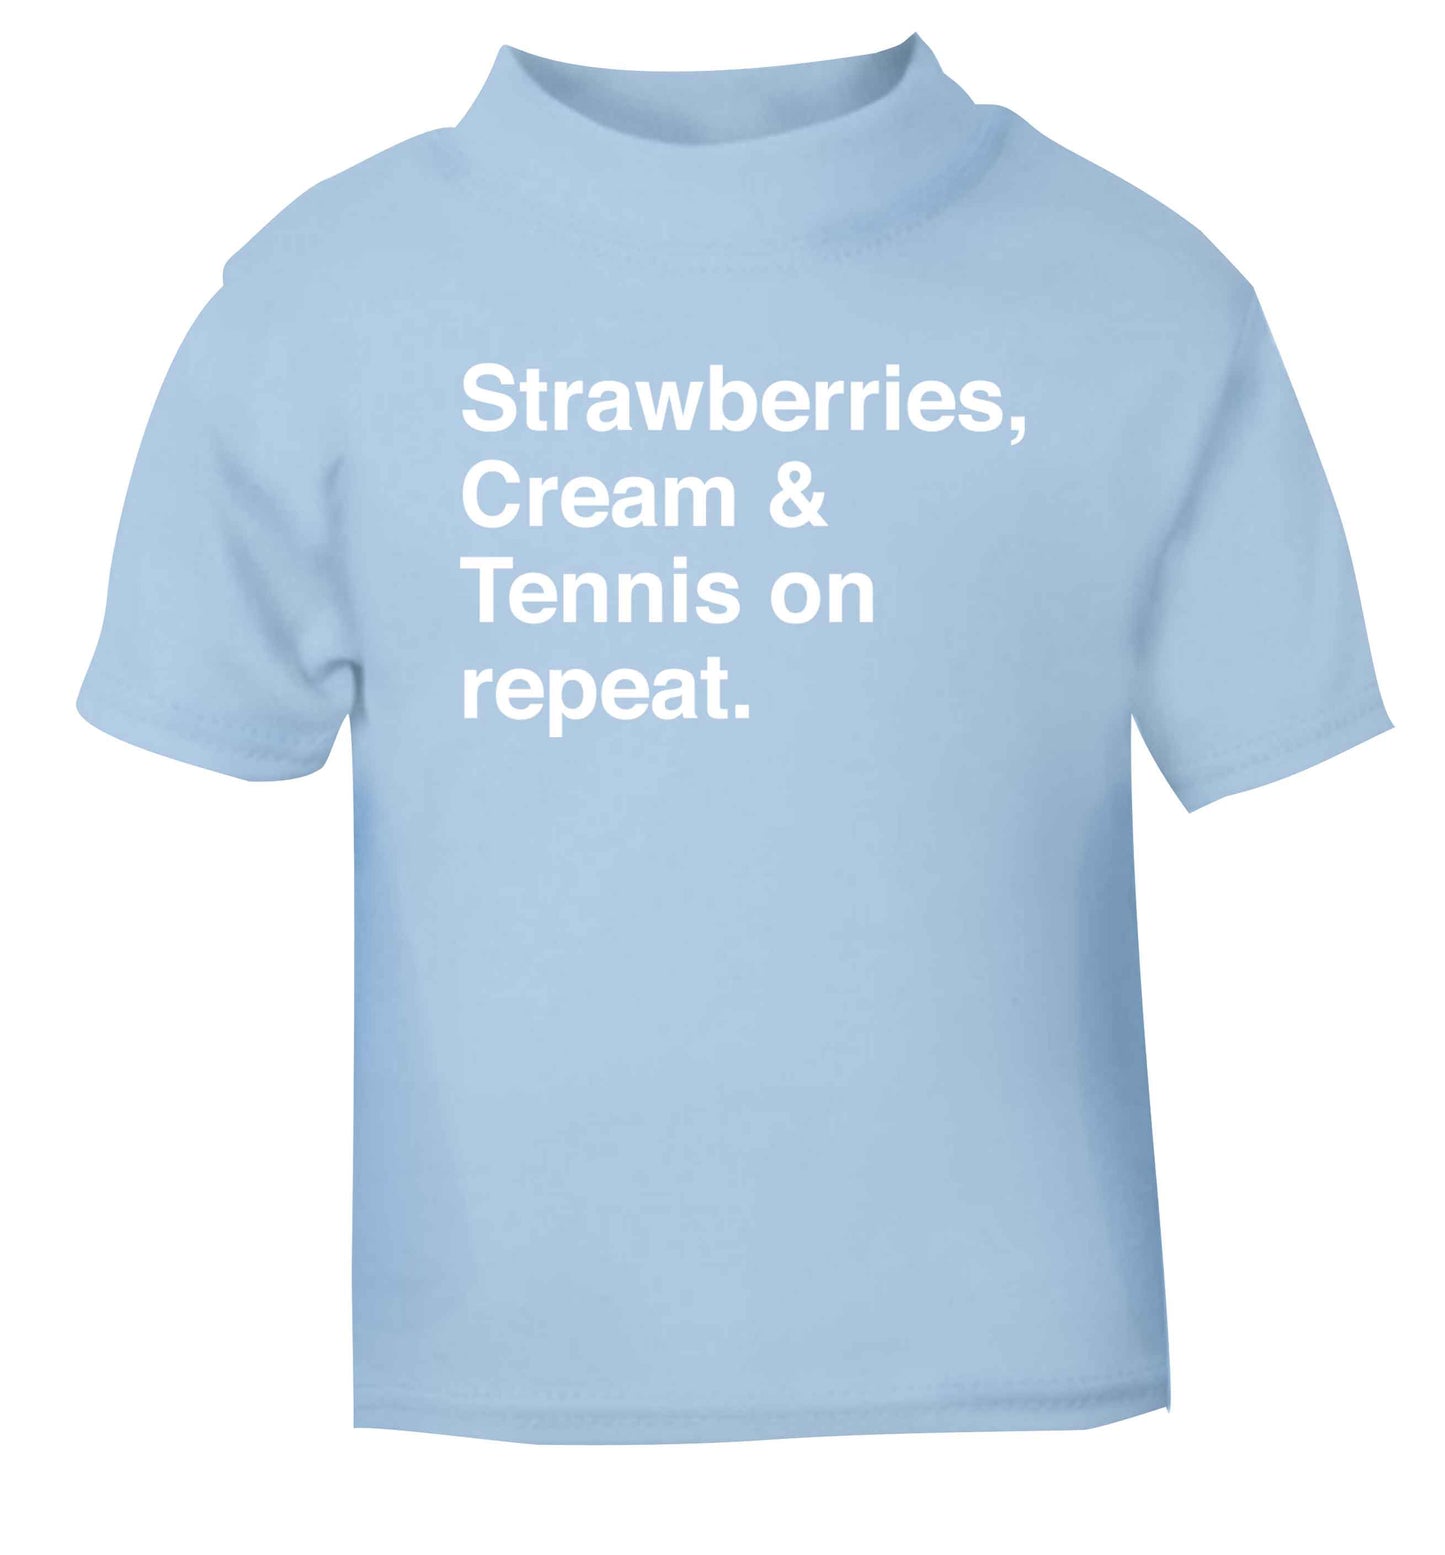 Strawberries, cream and tennis on repeat light blue Baby Toddler Tshirt 2 Years